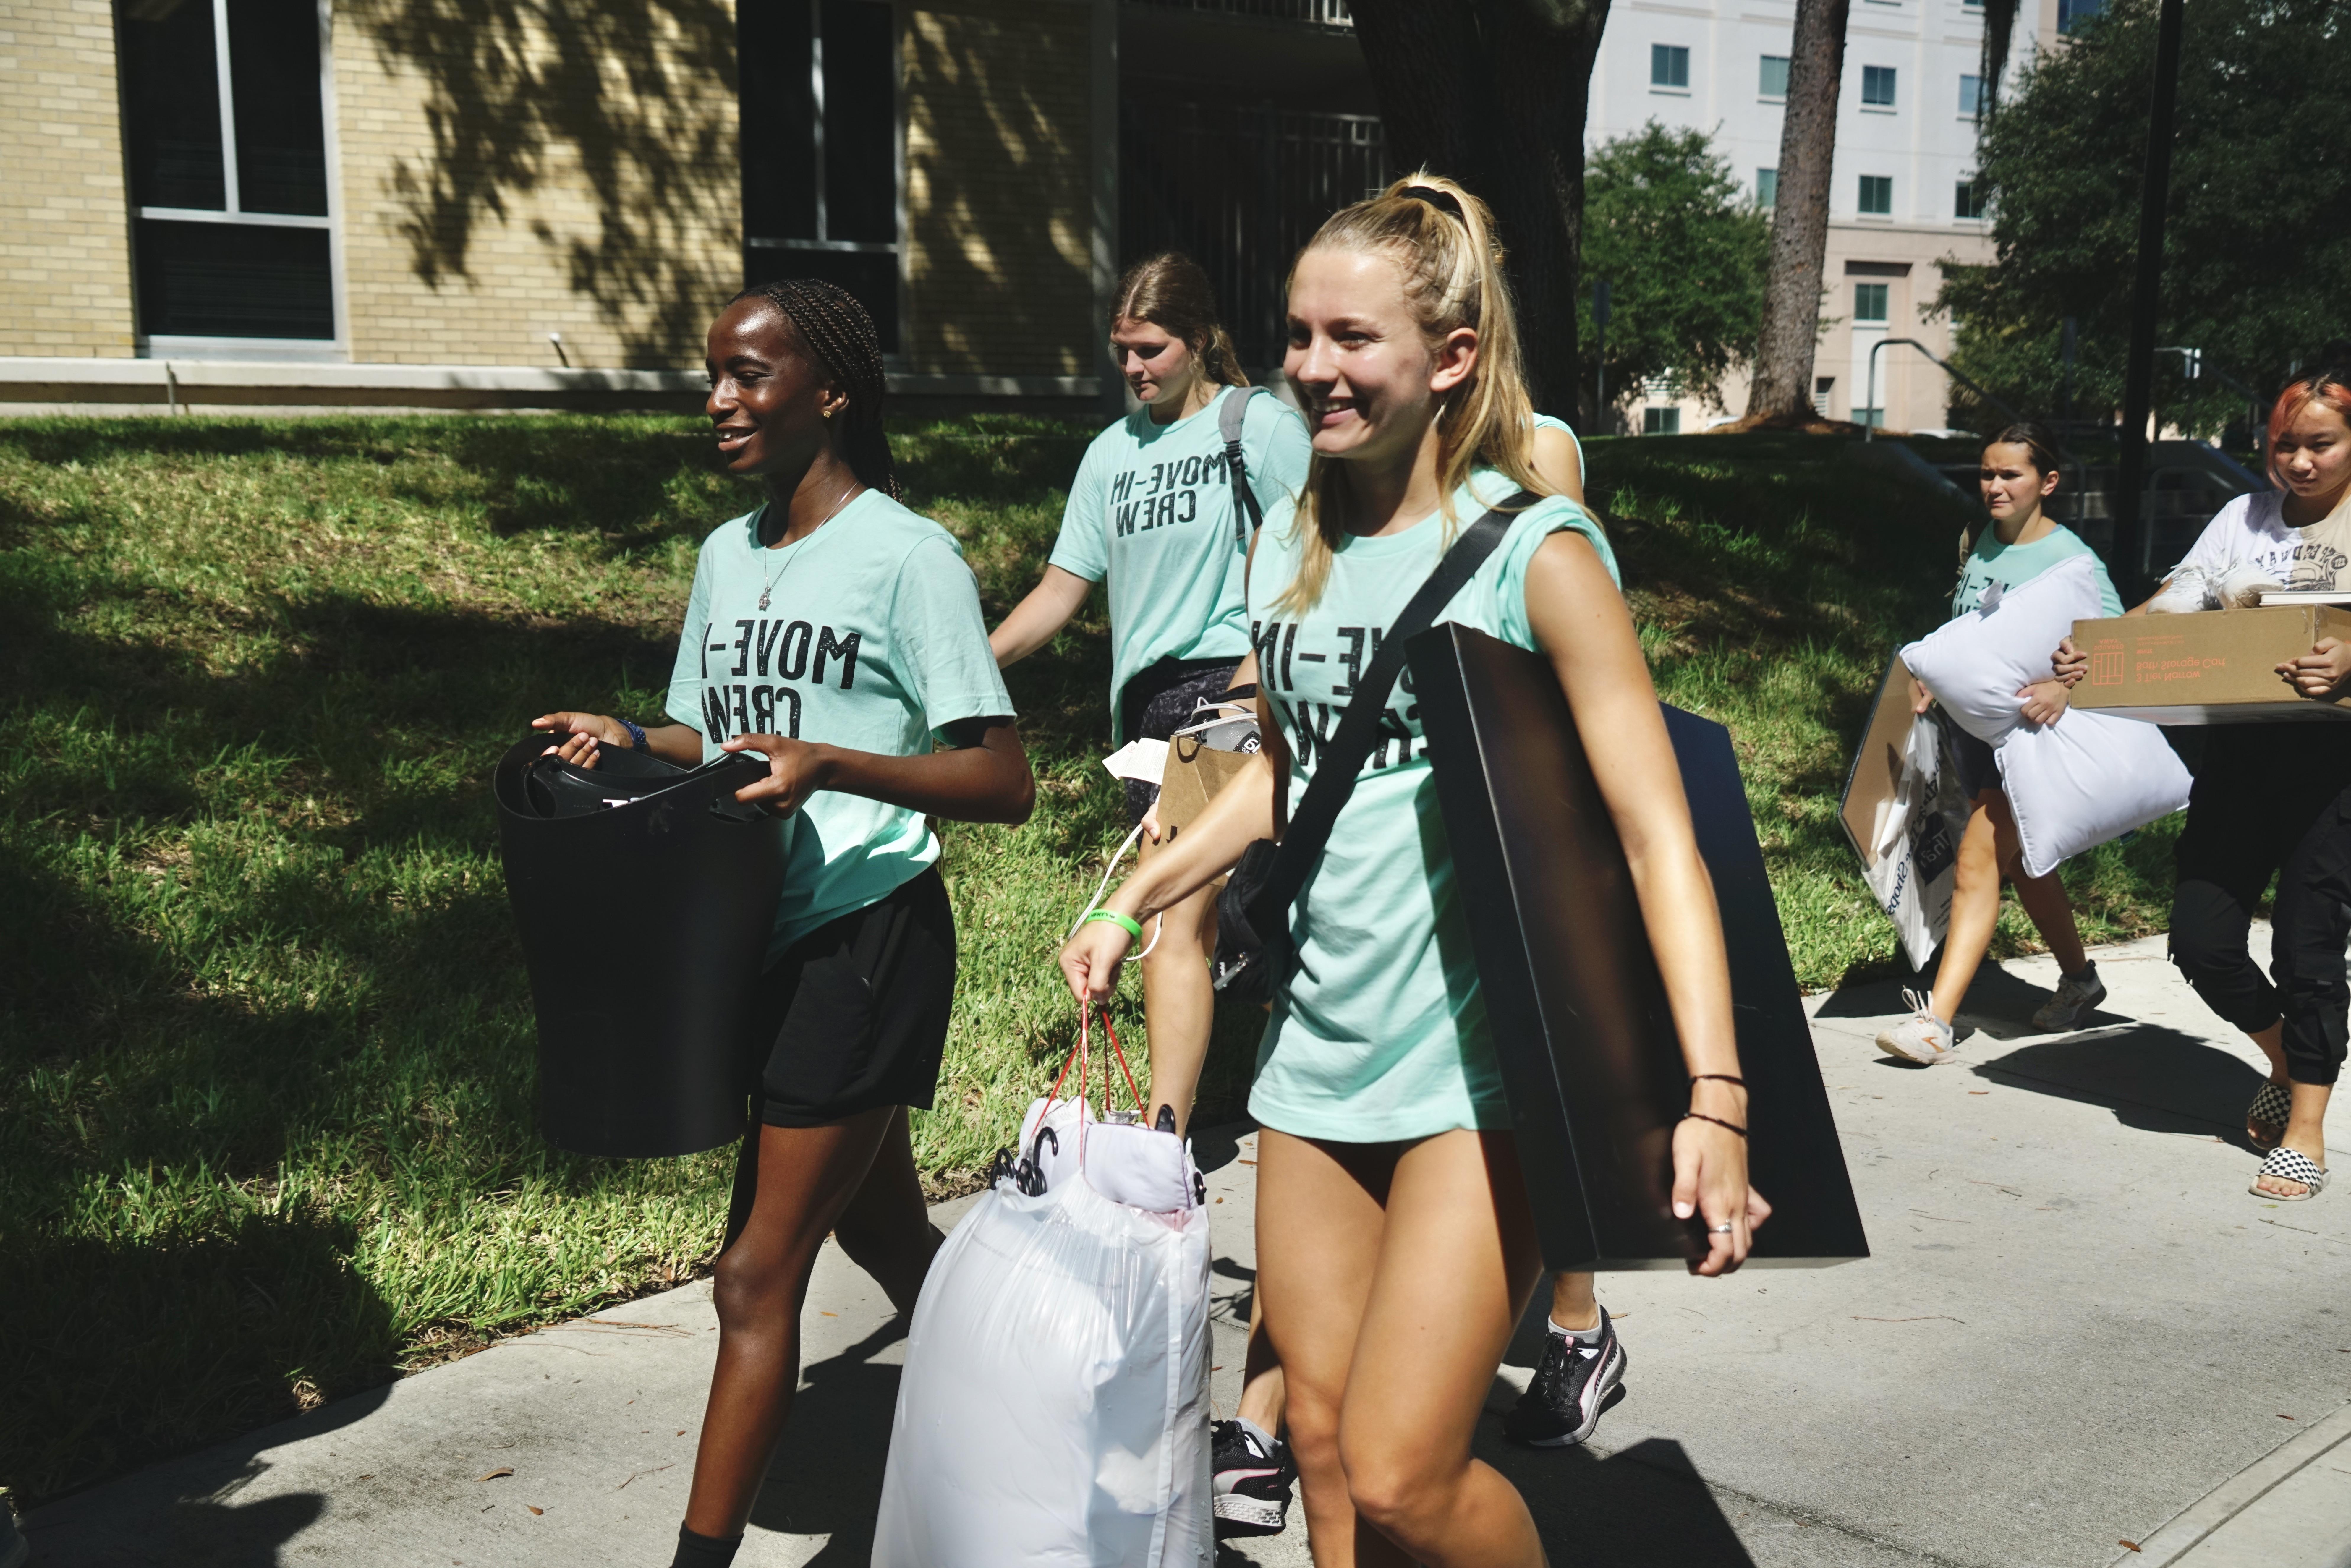  Smiling students help carry items inside during move-in.